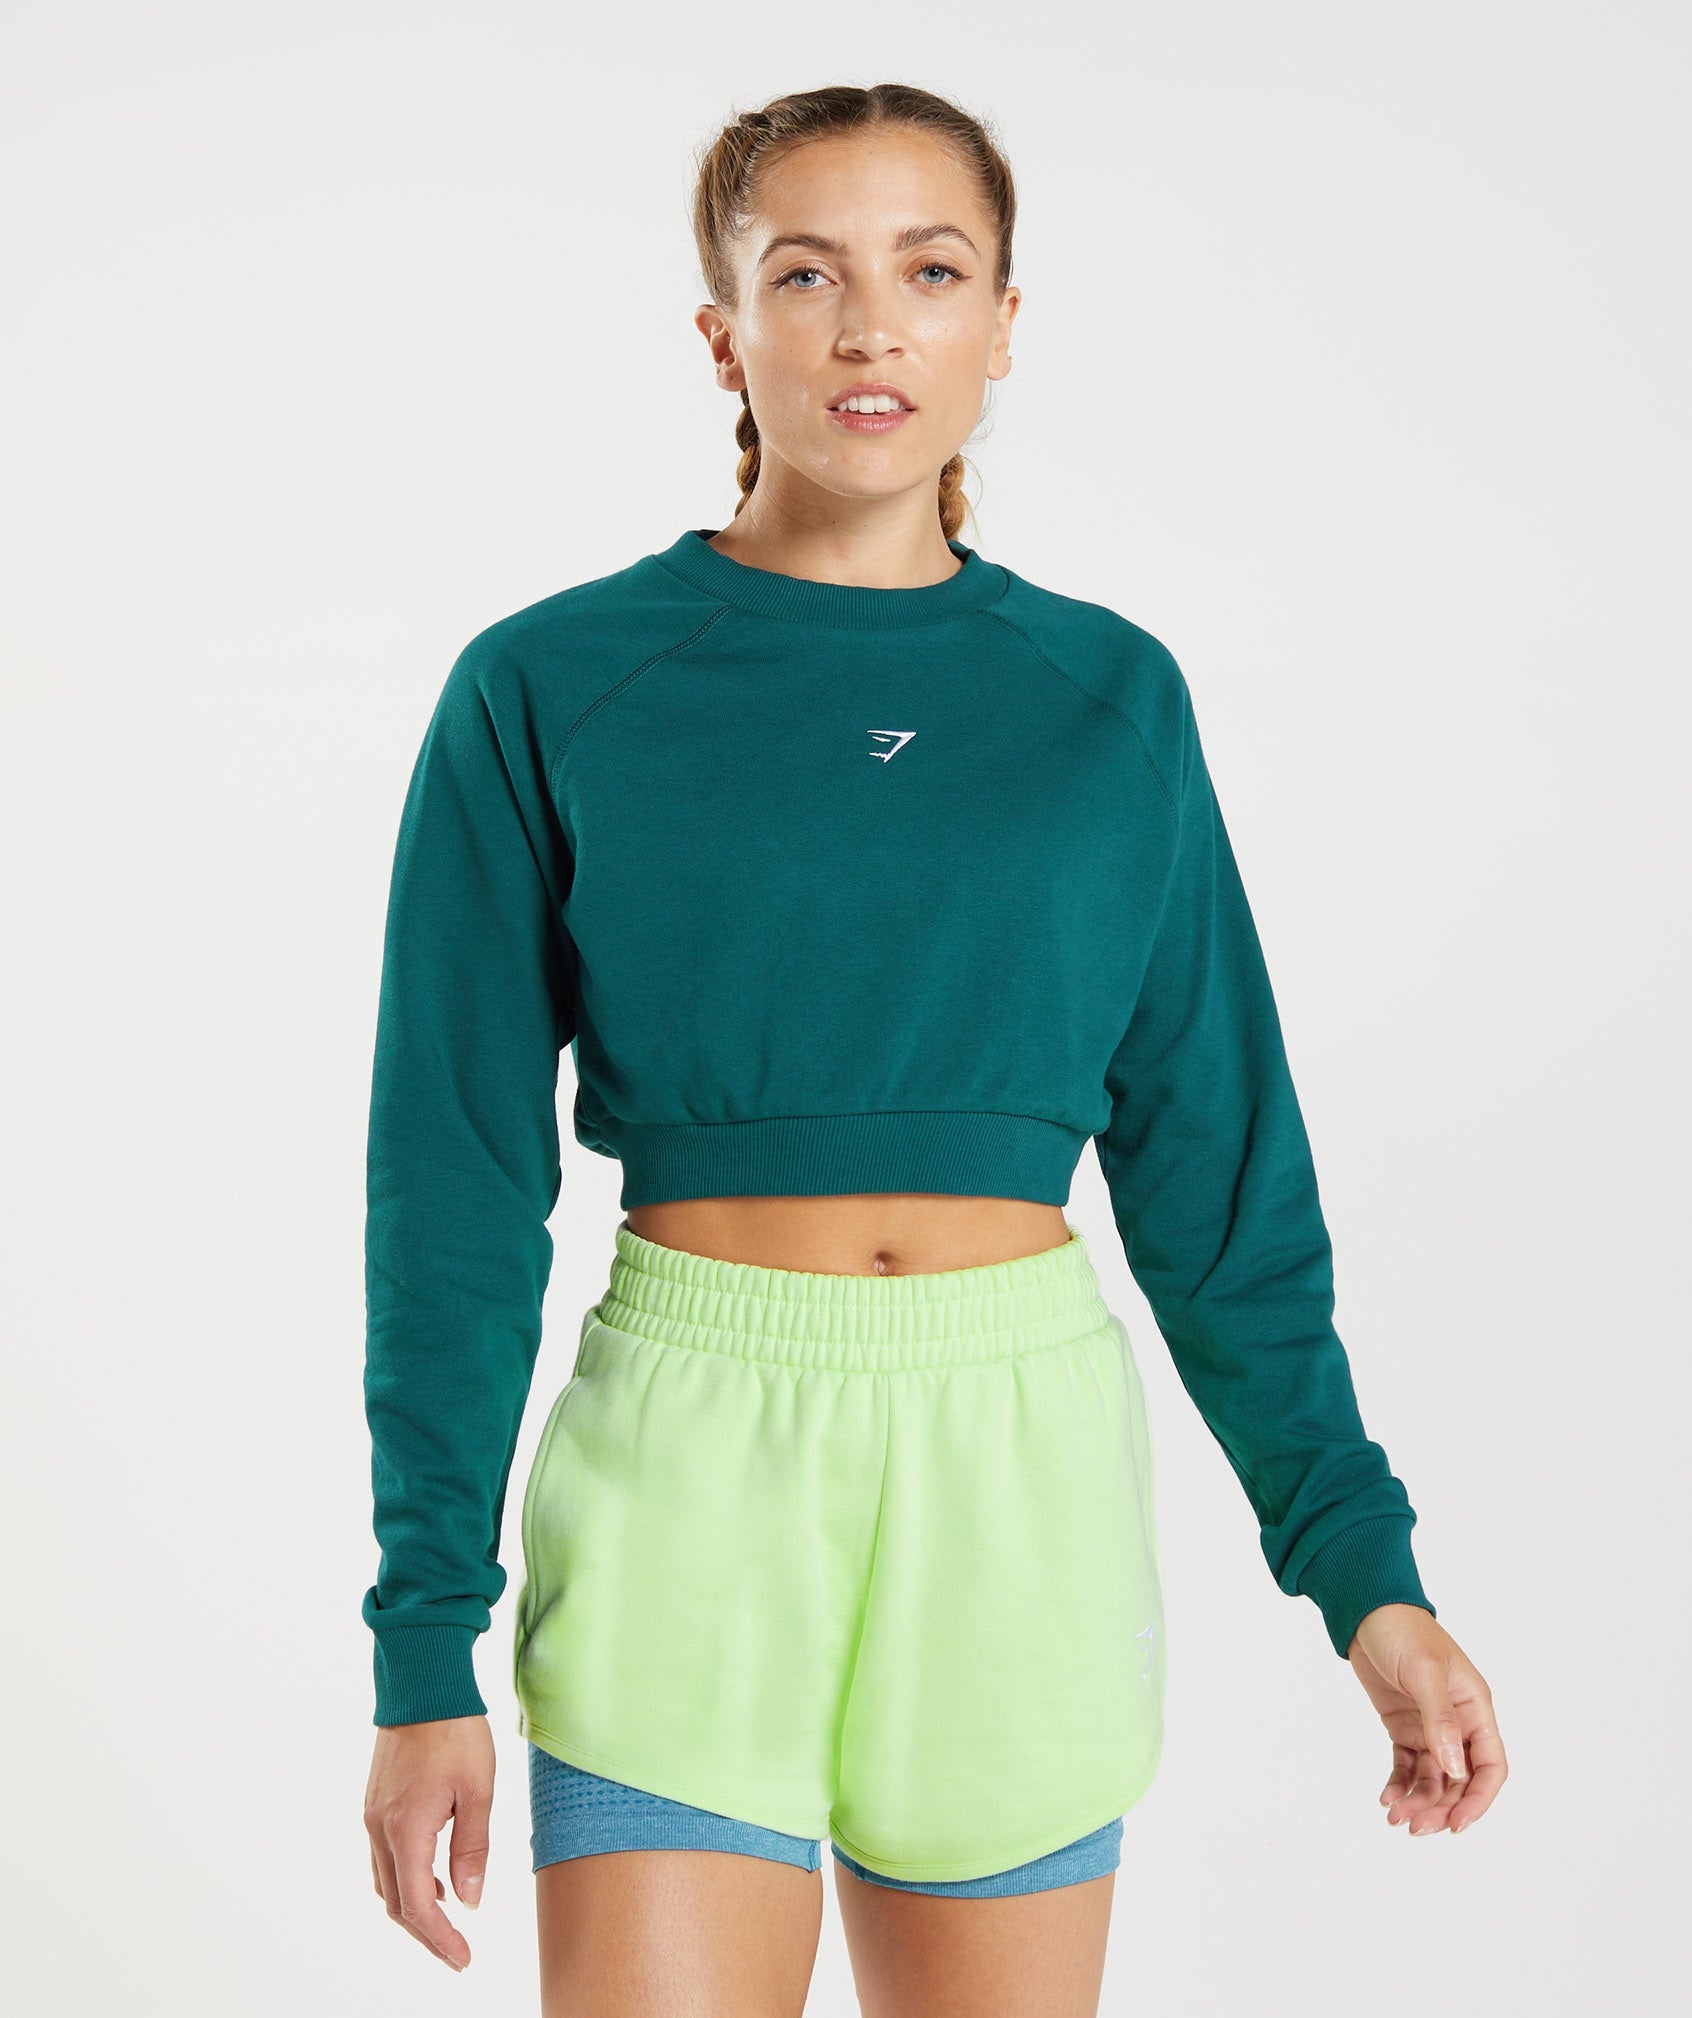 Training Cropped Sweater in Winter Teal is out of stock